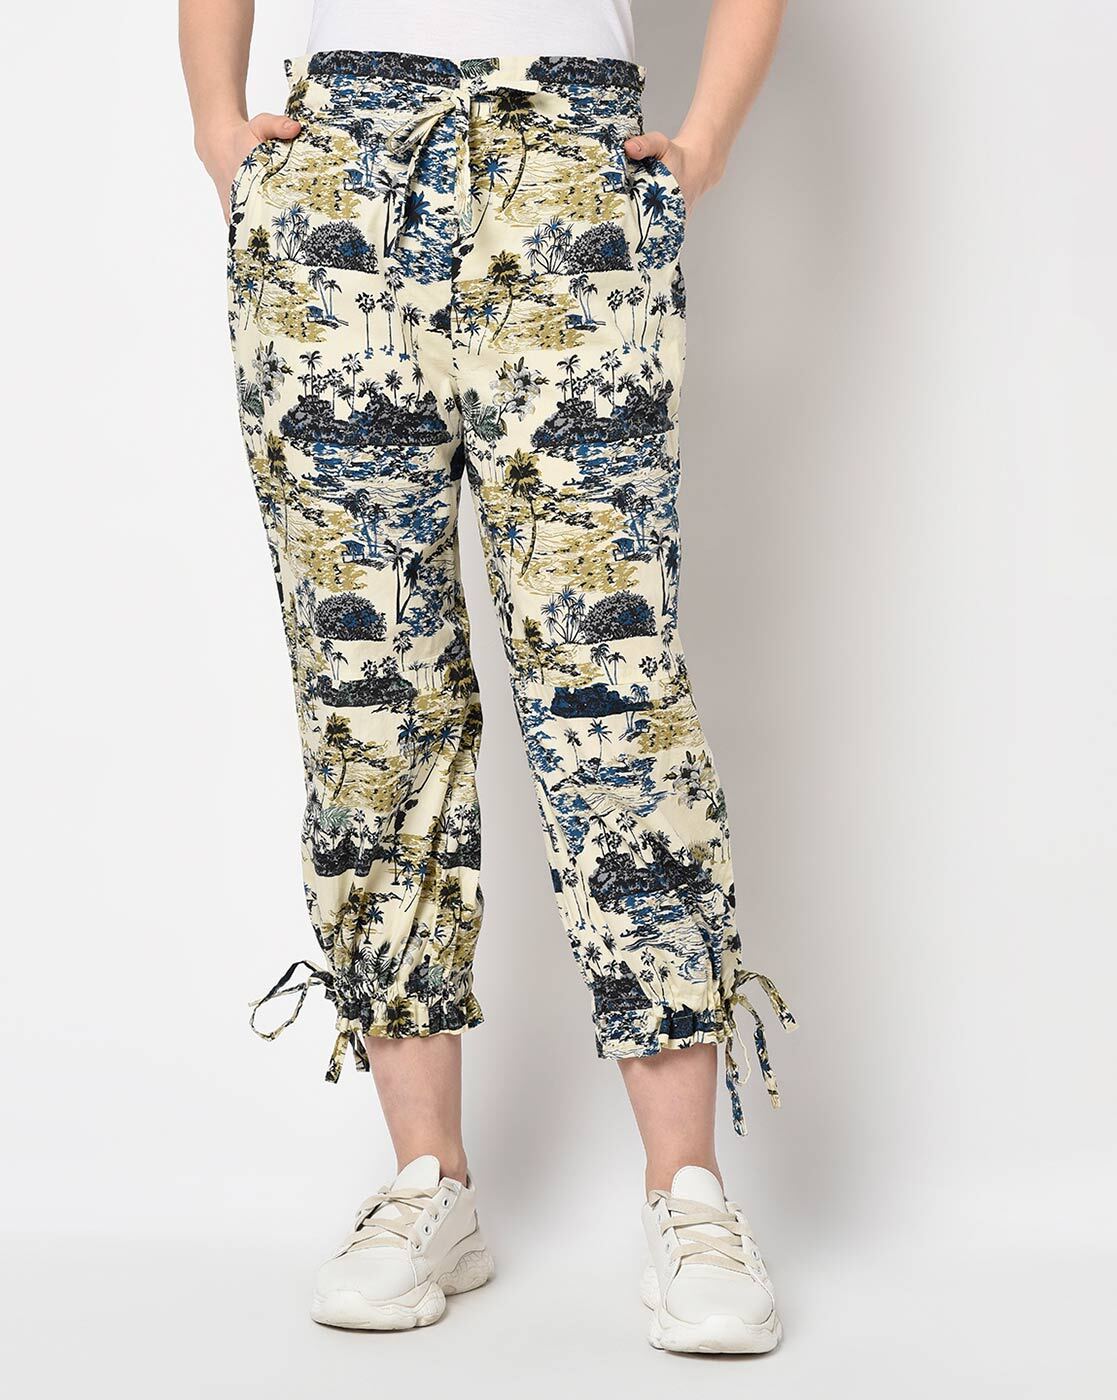 Weekday straight leg cut out waist pants in floral print | ASOS